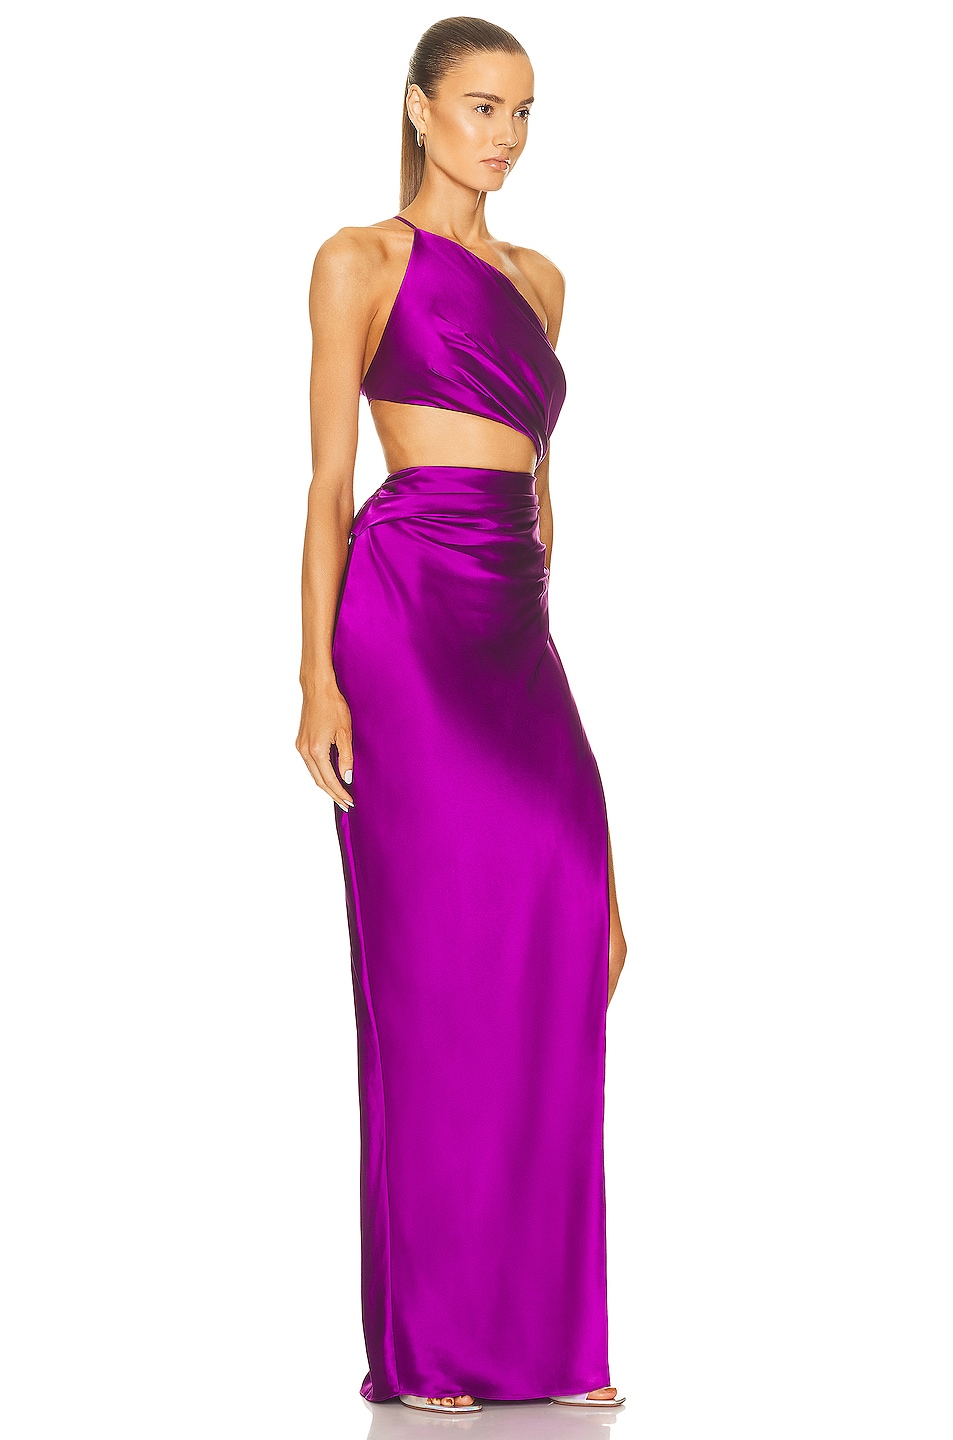 The Sei for FWRD One Shoulder Cut Out Gown in Acai | FWRD